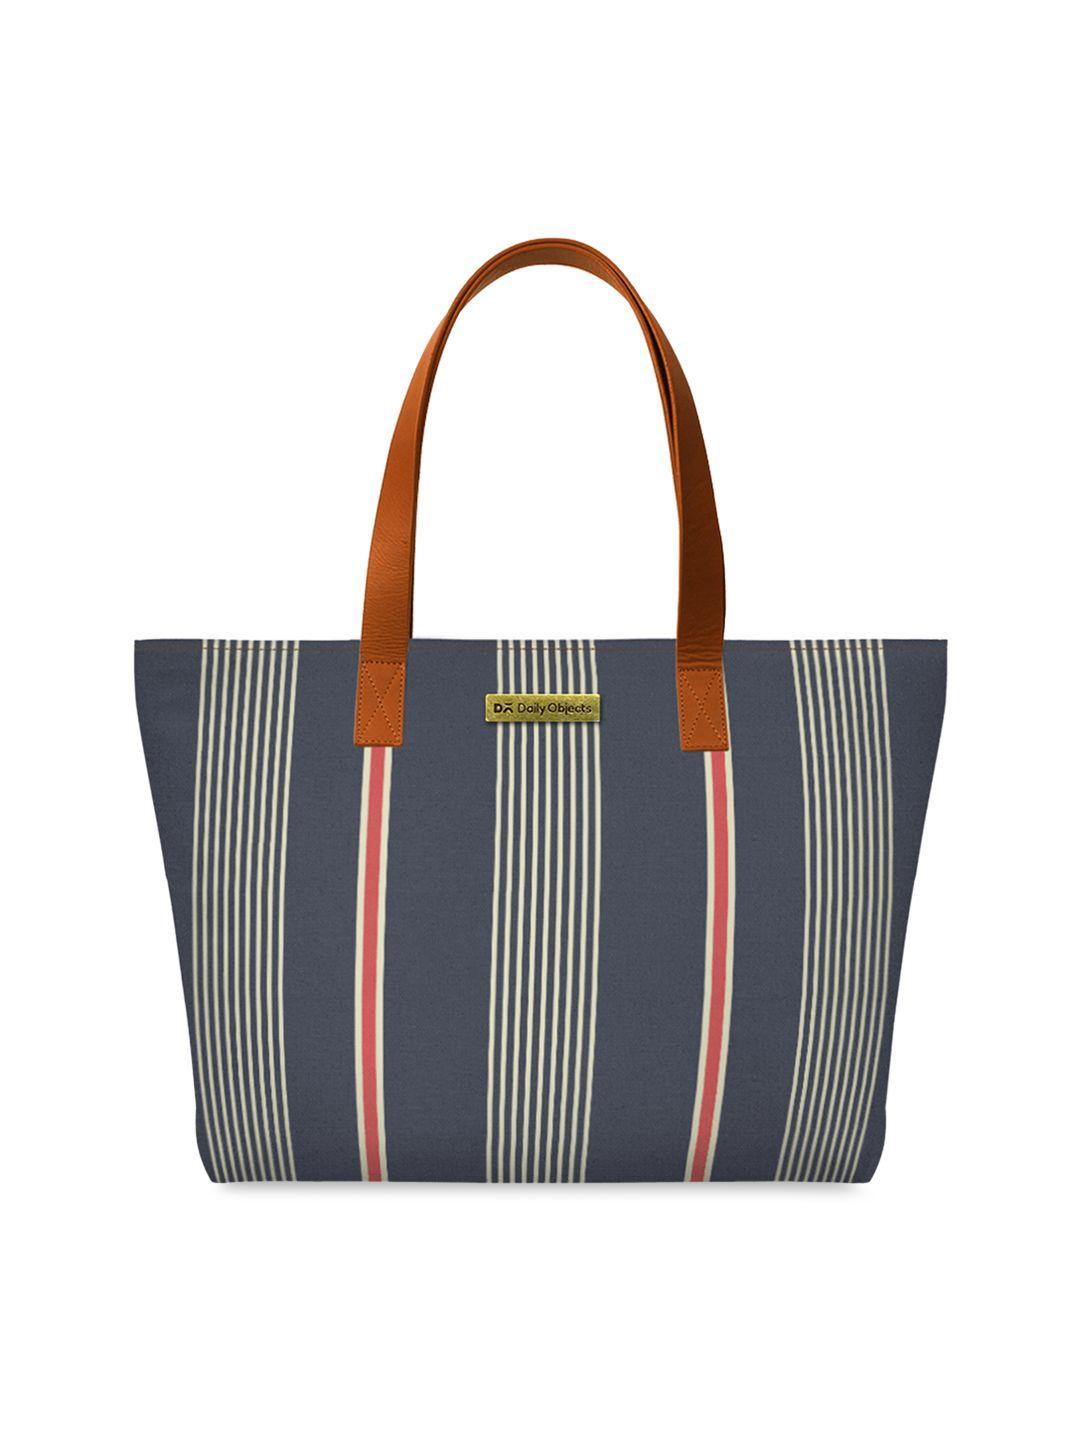 dailyobjects navy blue & off-white striped tote bag